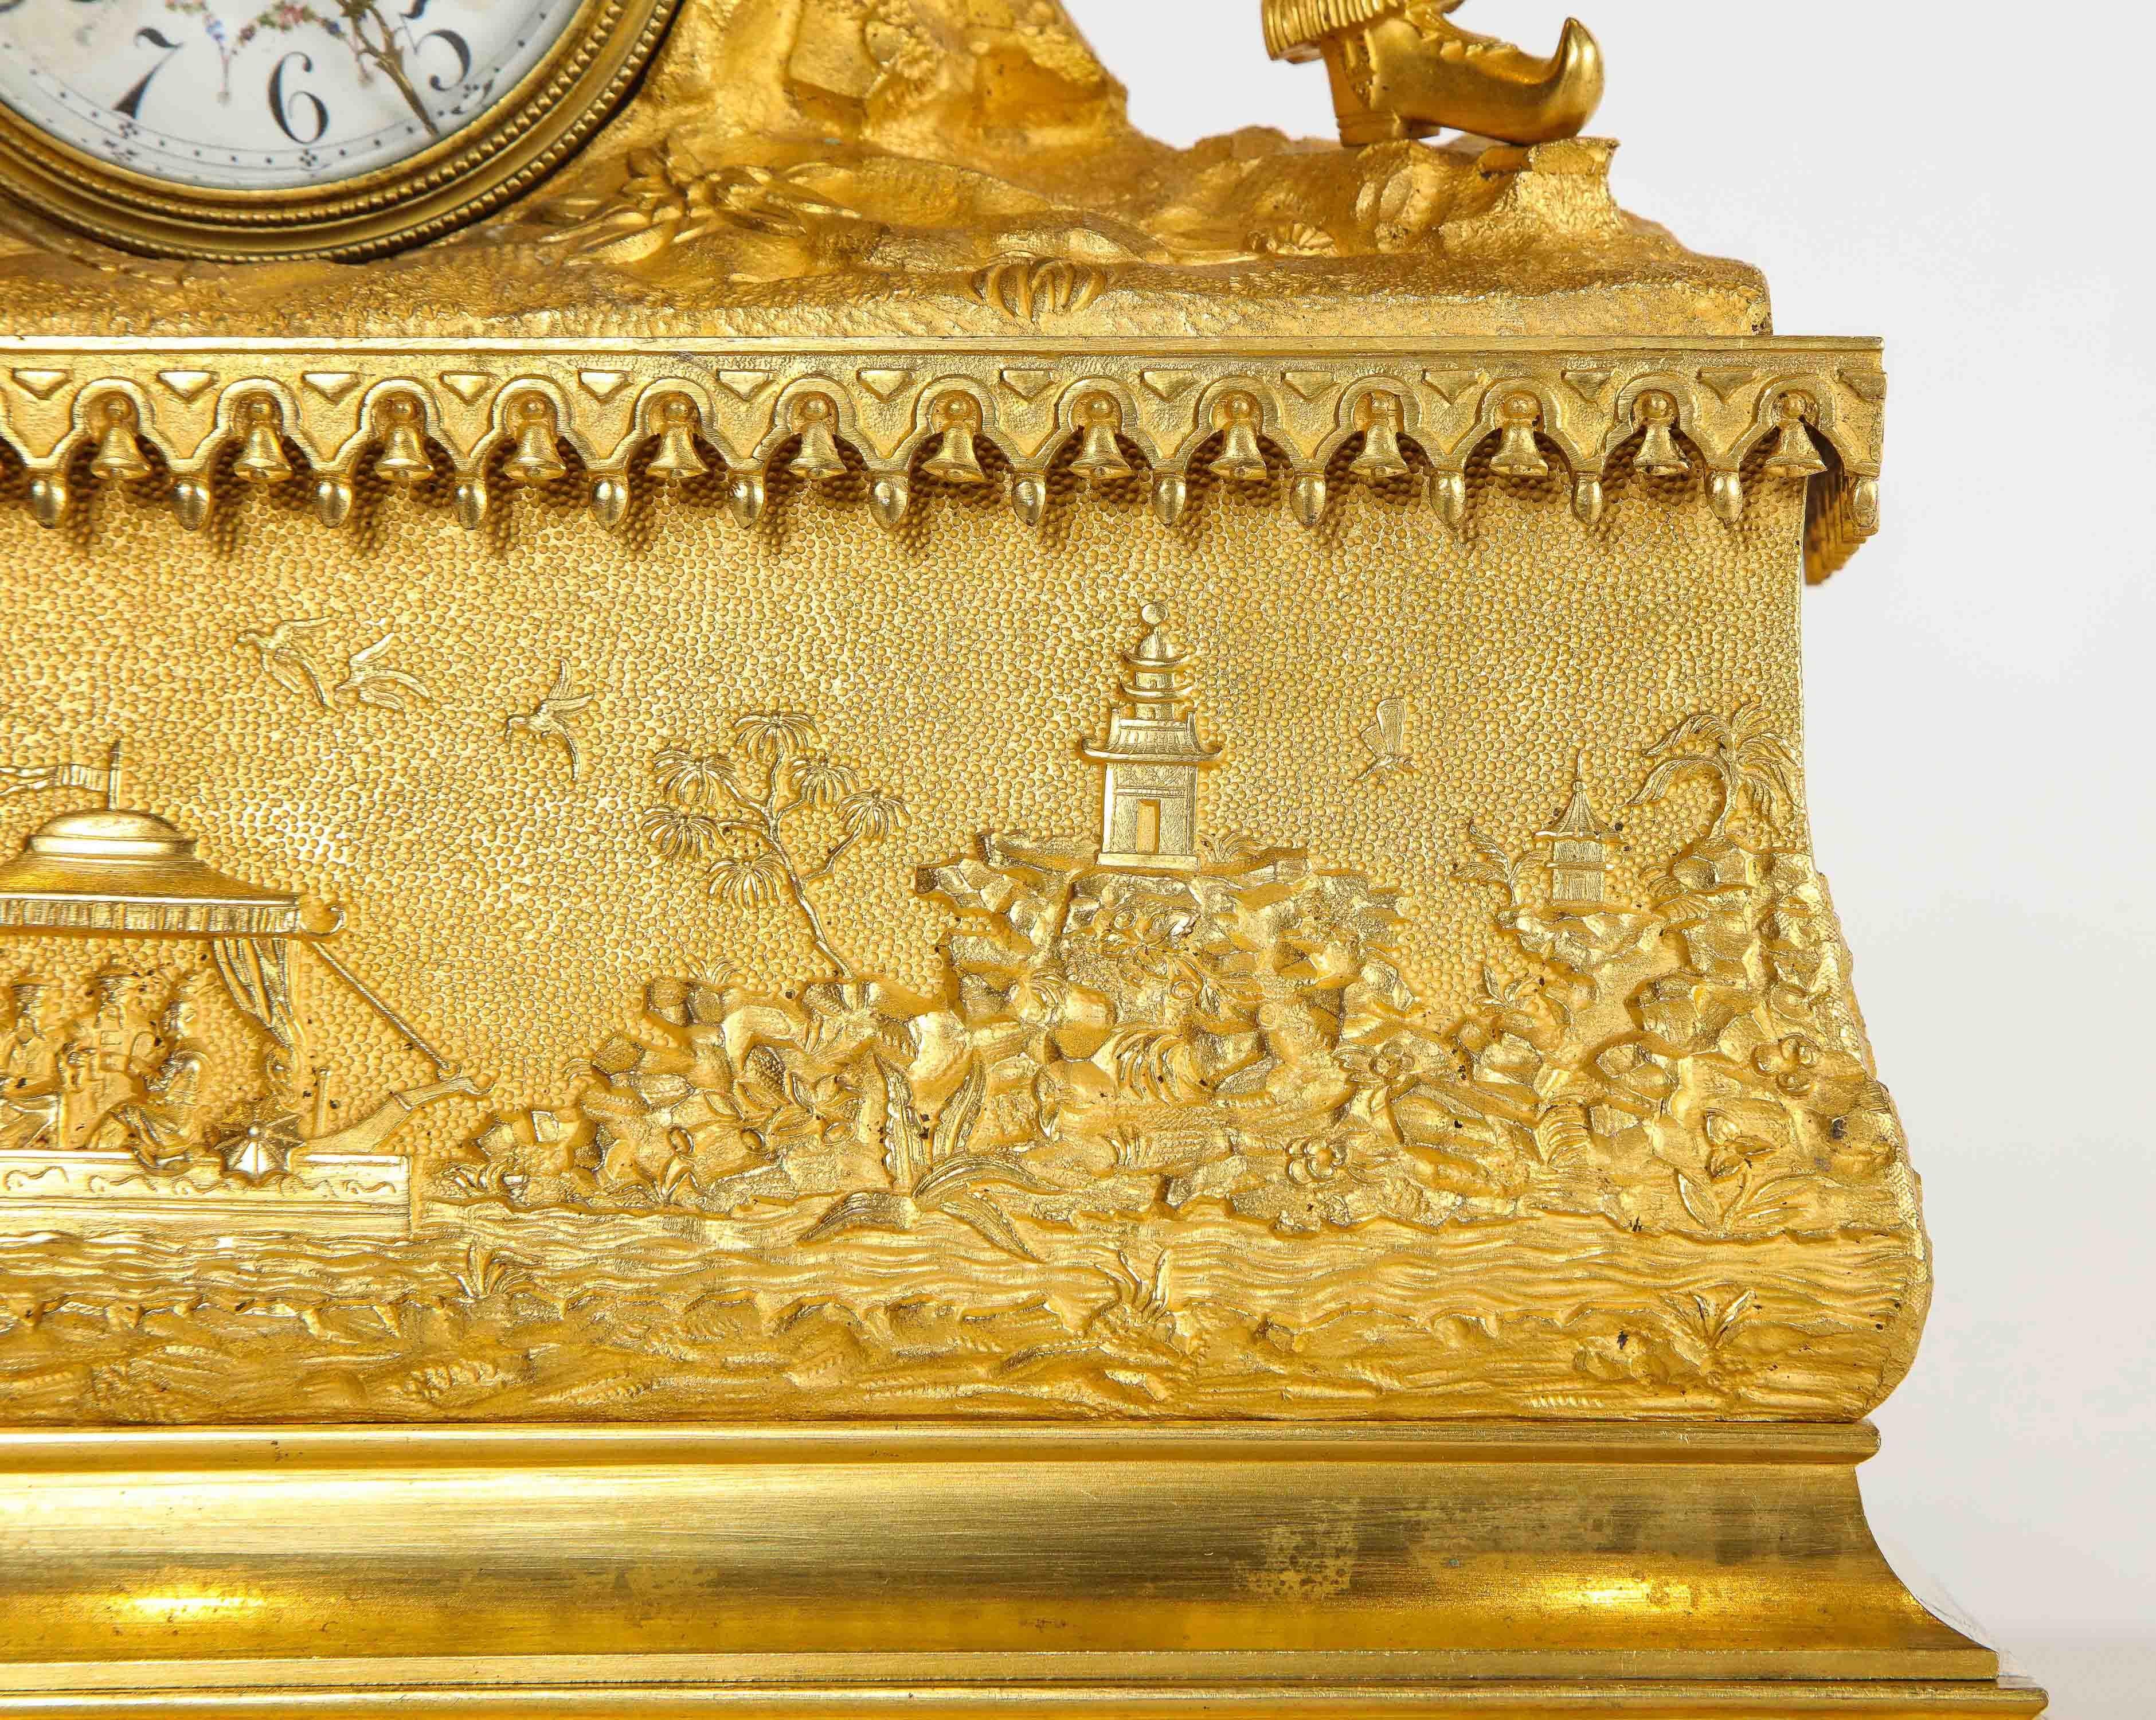 Exquisite French Charles X Ormolu Chinoiserie Figural Table Clock 2